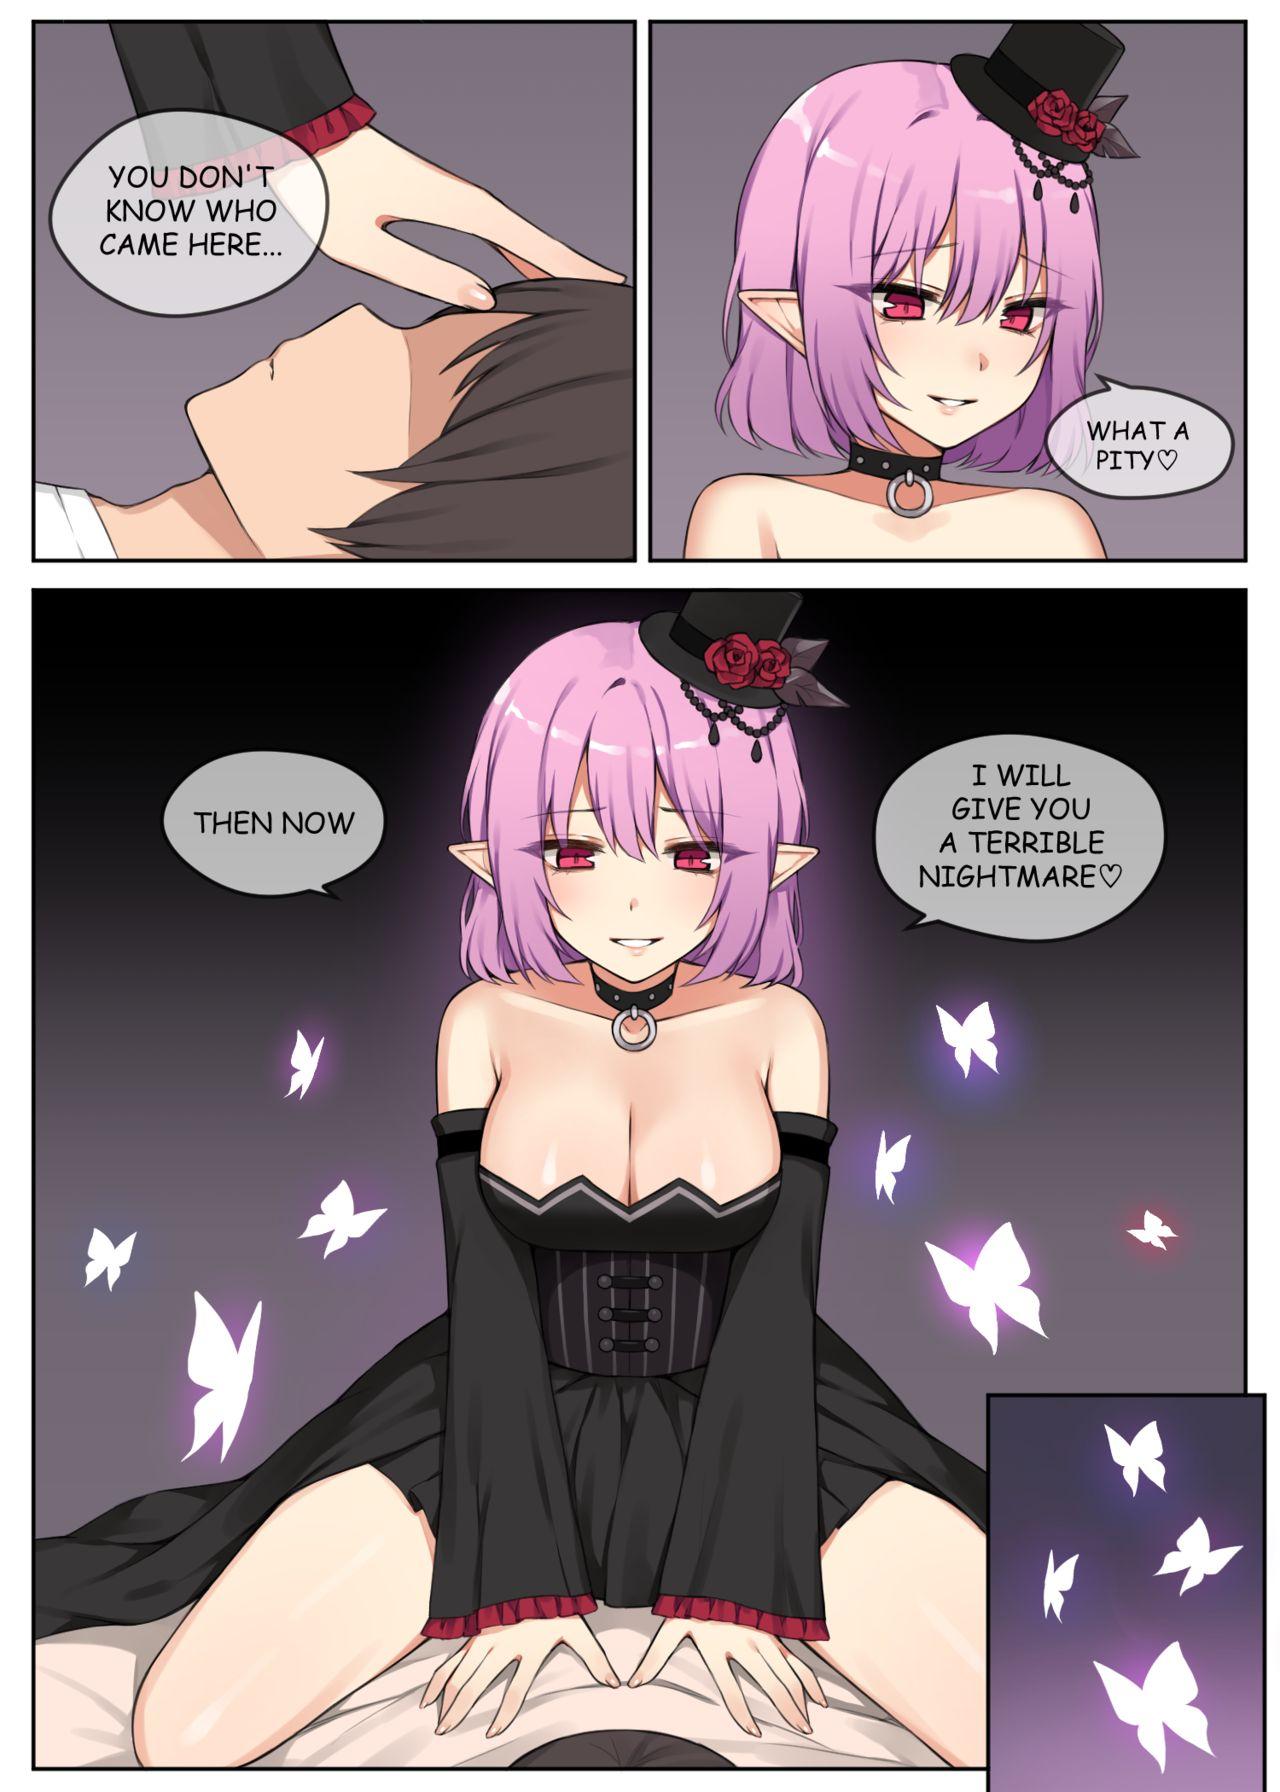 Small Tits [CANAPE} 건방진 루시드2 / Cheeky LUCID2 [English] [Decensored] - Maplestory Amatur Porn - Page 5